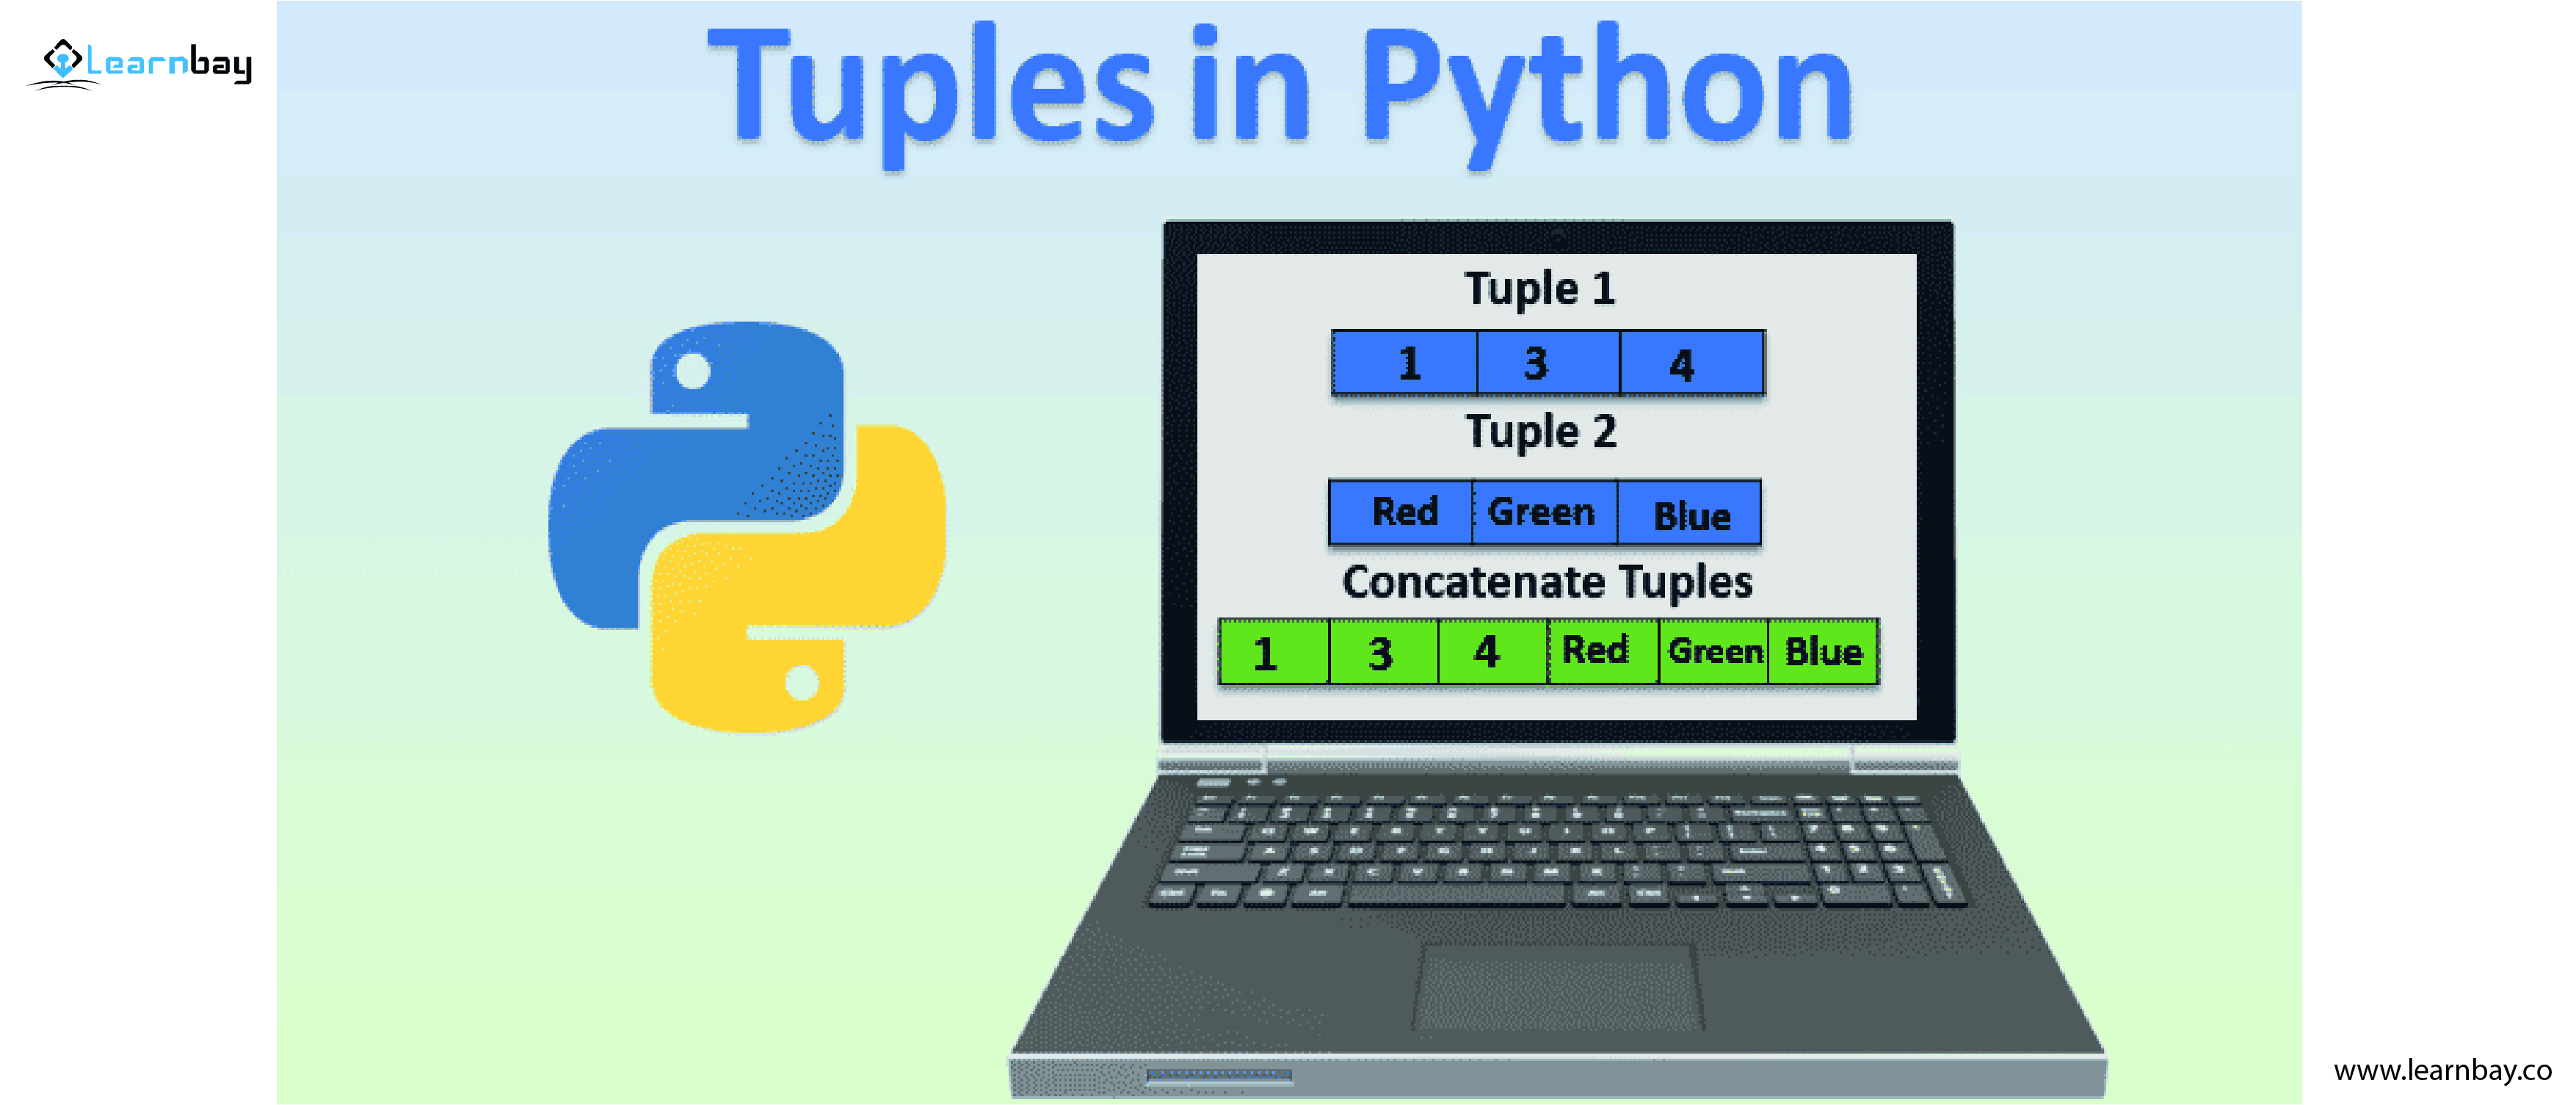 An image displaying the example for tuples in Python. The example is made up of Tuple 1, Tuple 2,  Concatenate Tuples.